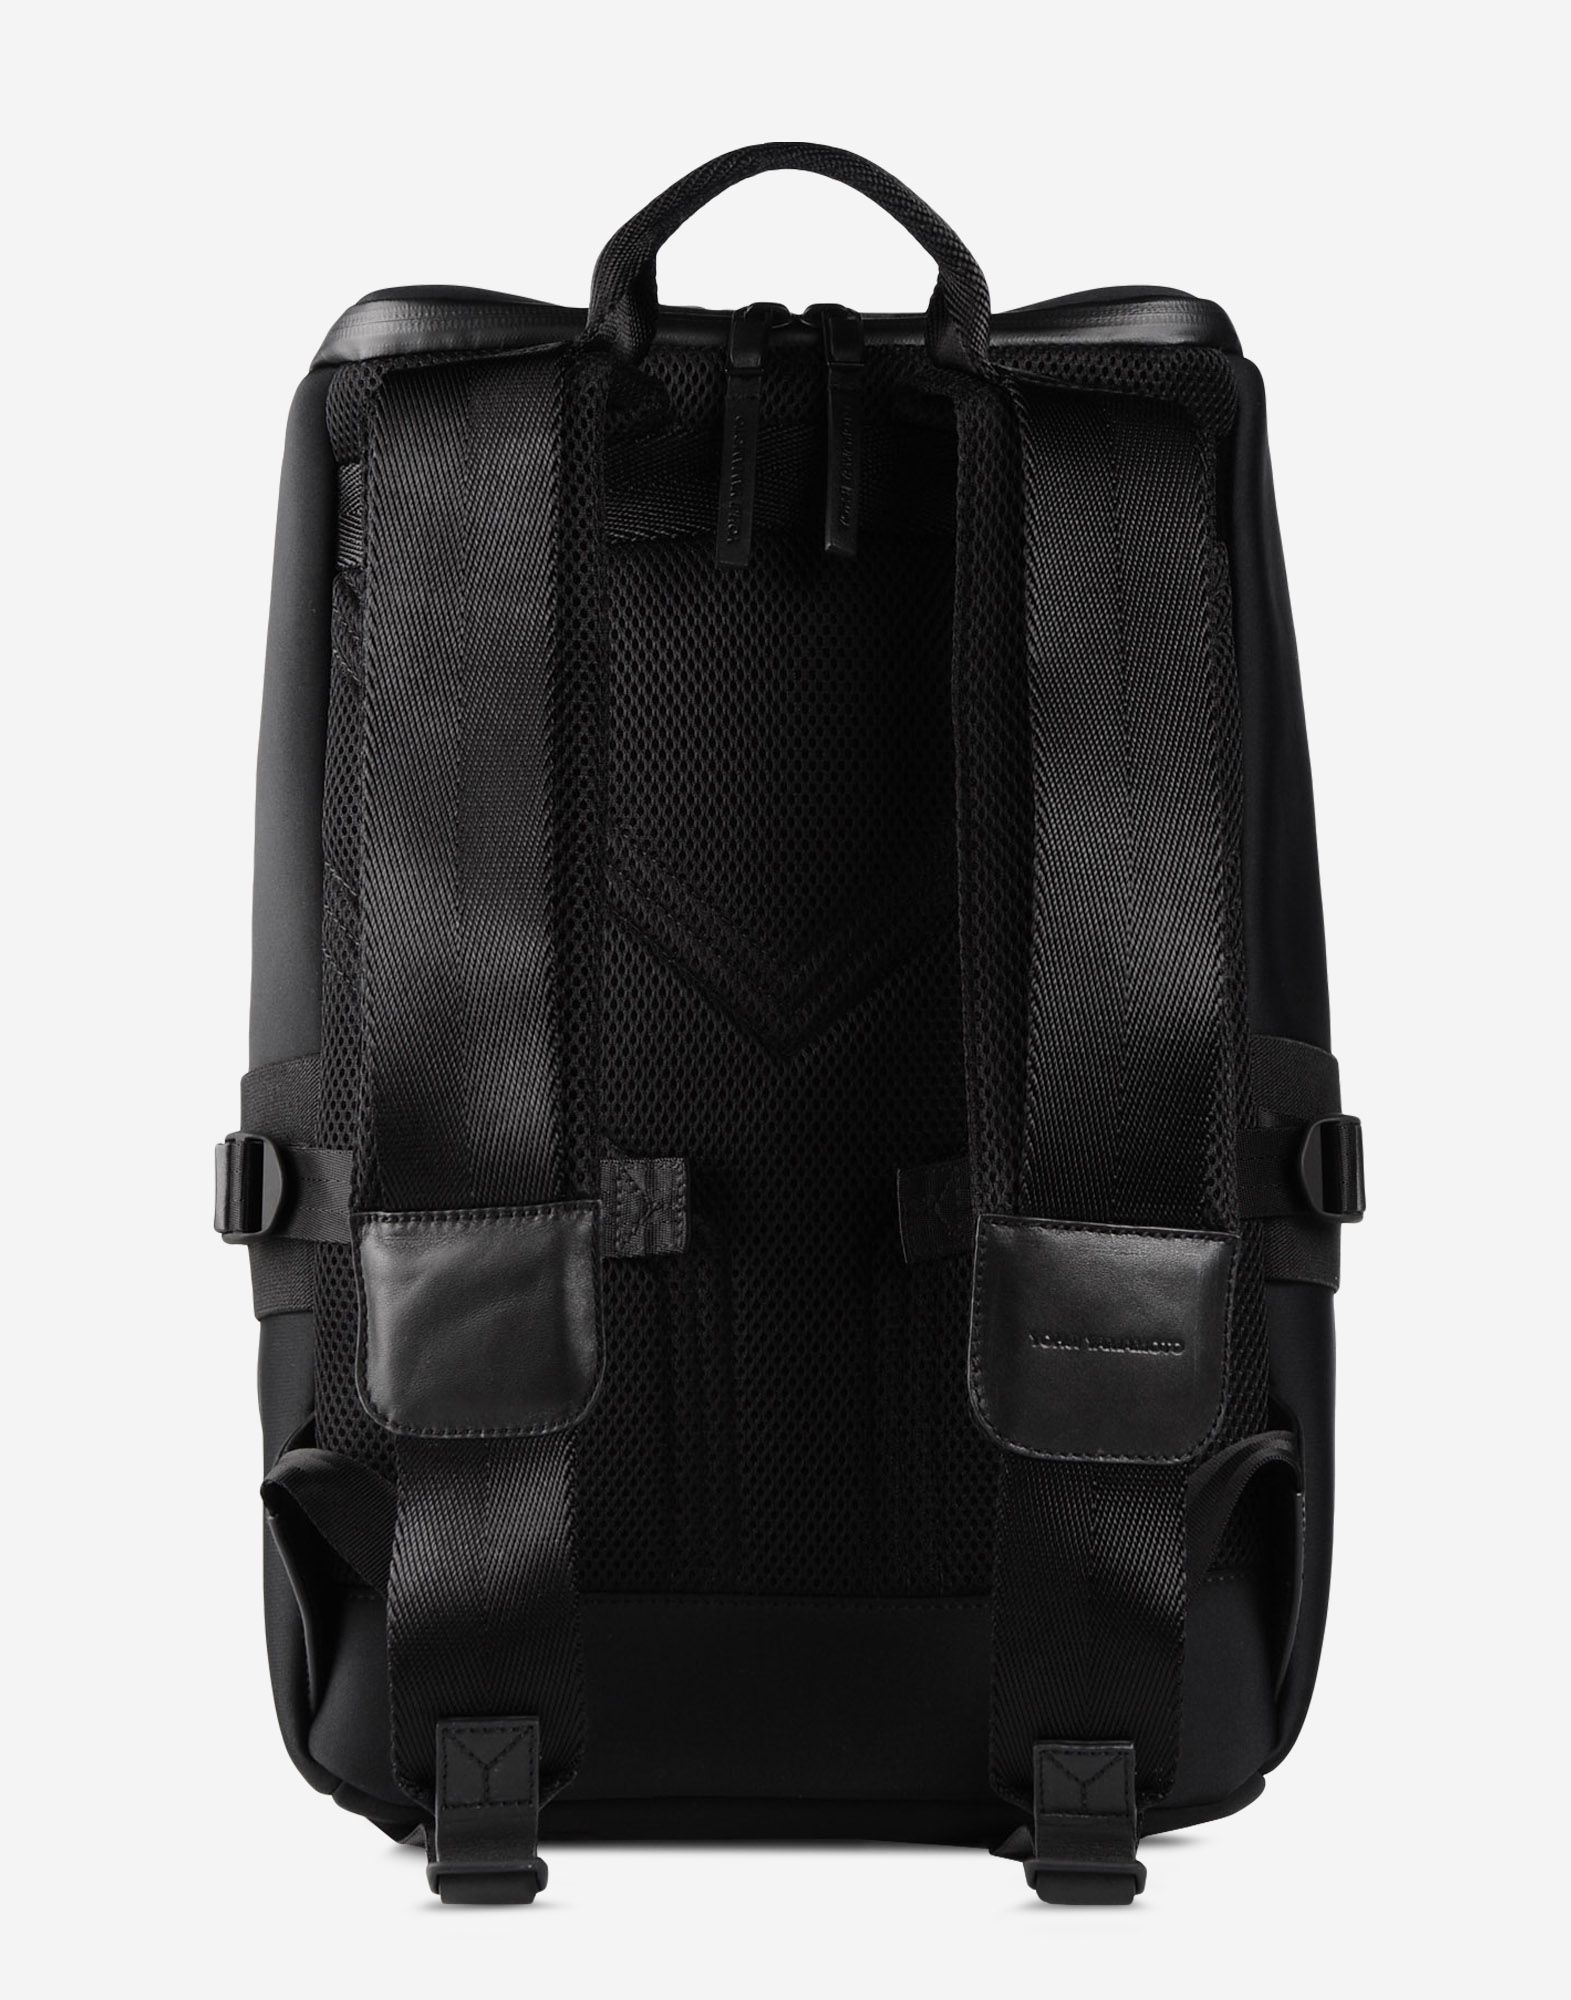 Y 3 DAY SMALL BACKPACK for Women | Adidas Y-3 Official Store